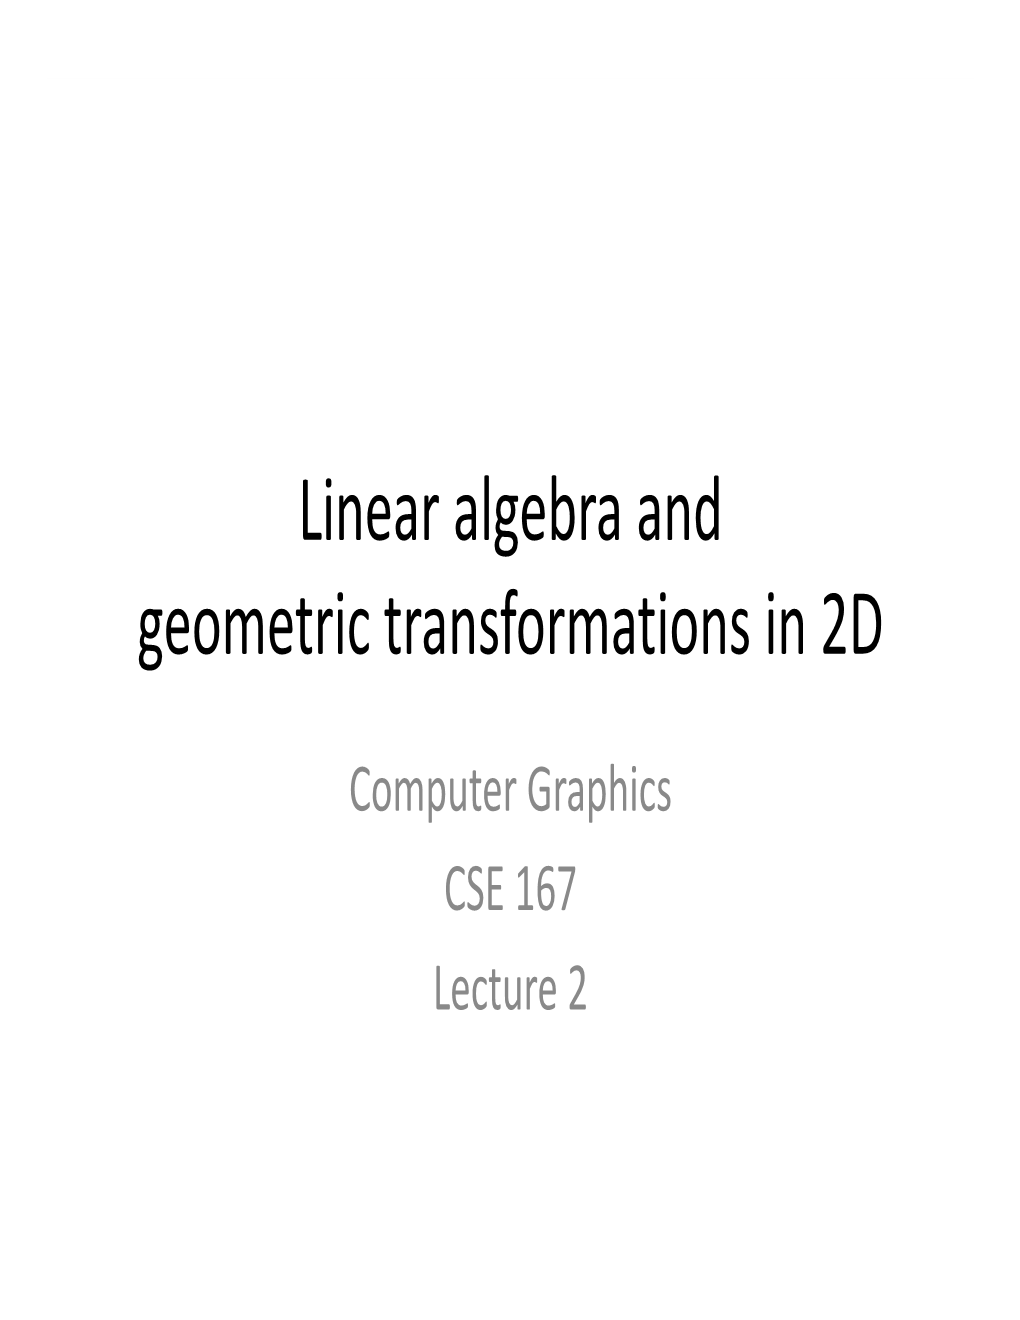 Linear Algebra and Geometric Transformations in 2D